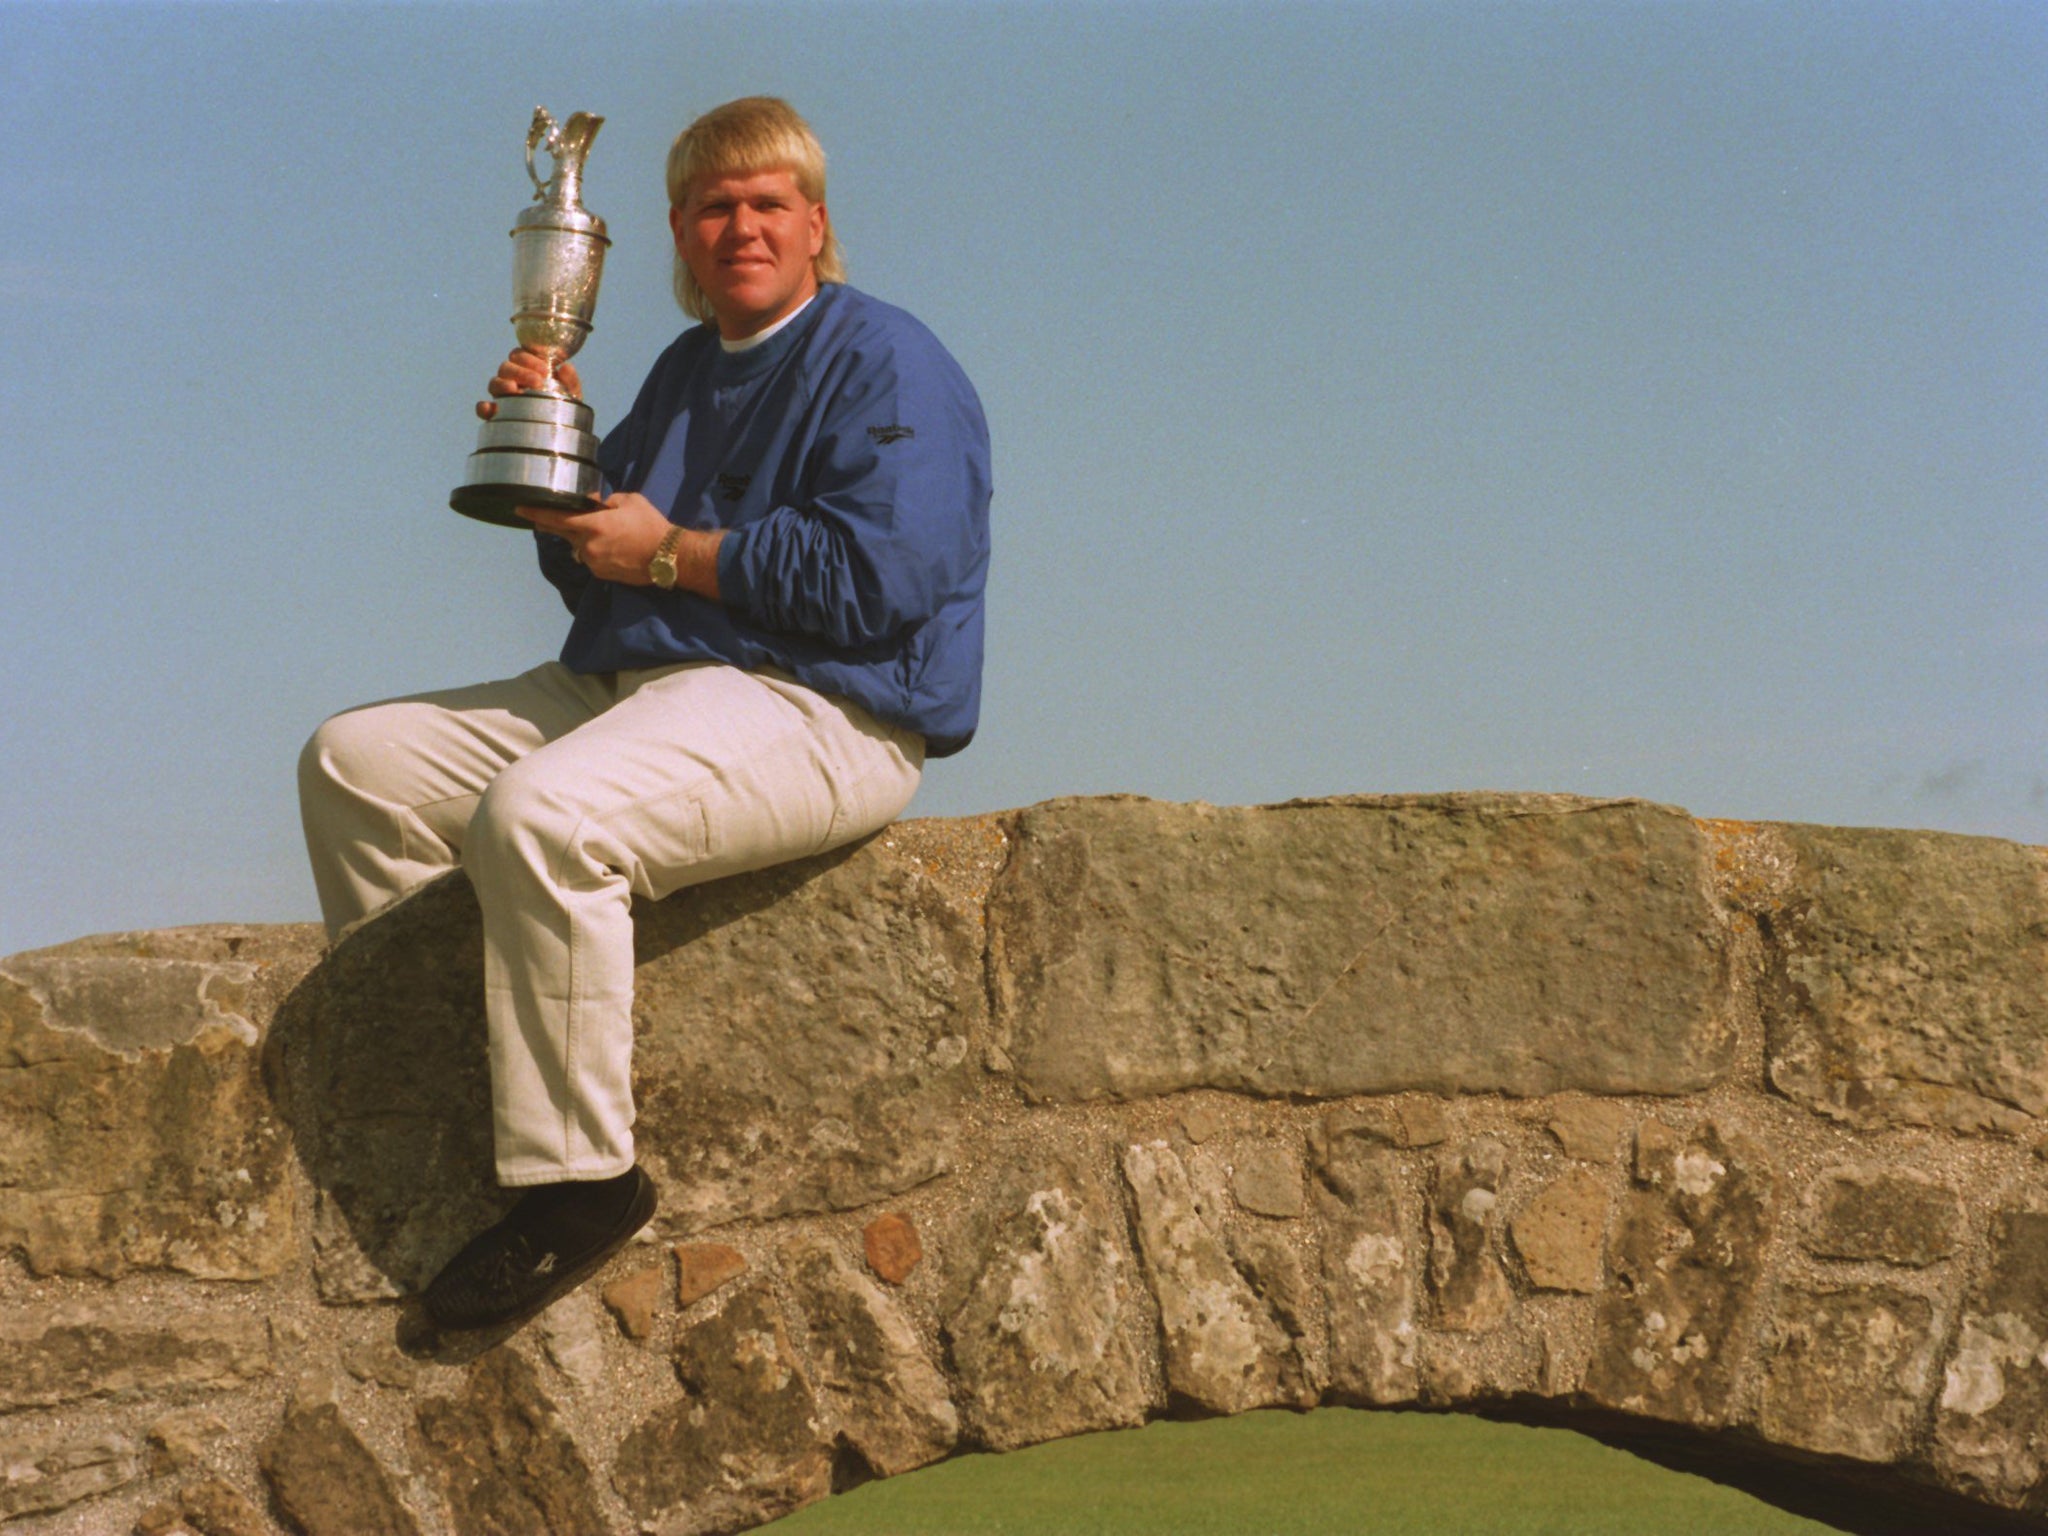 American golfing icon John Daly turns heads at The Open AGAIN as